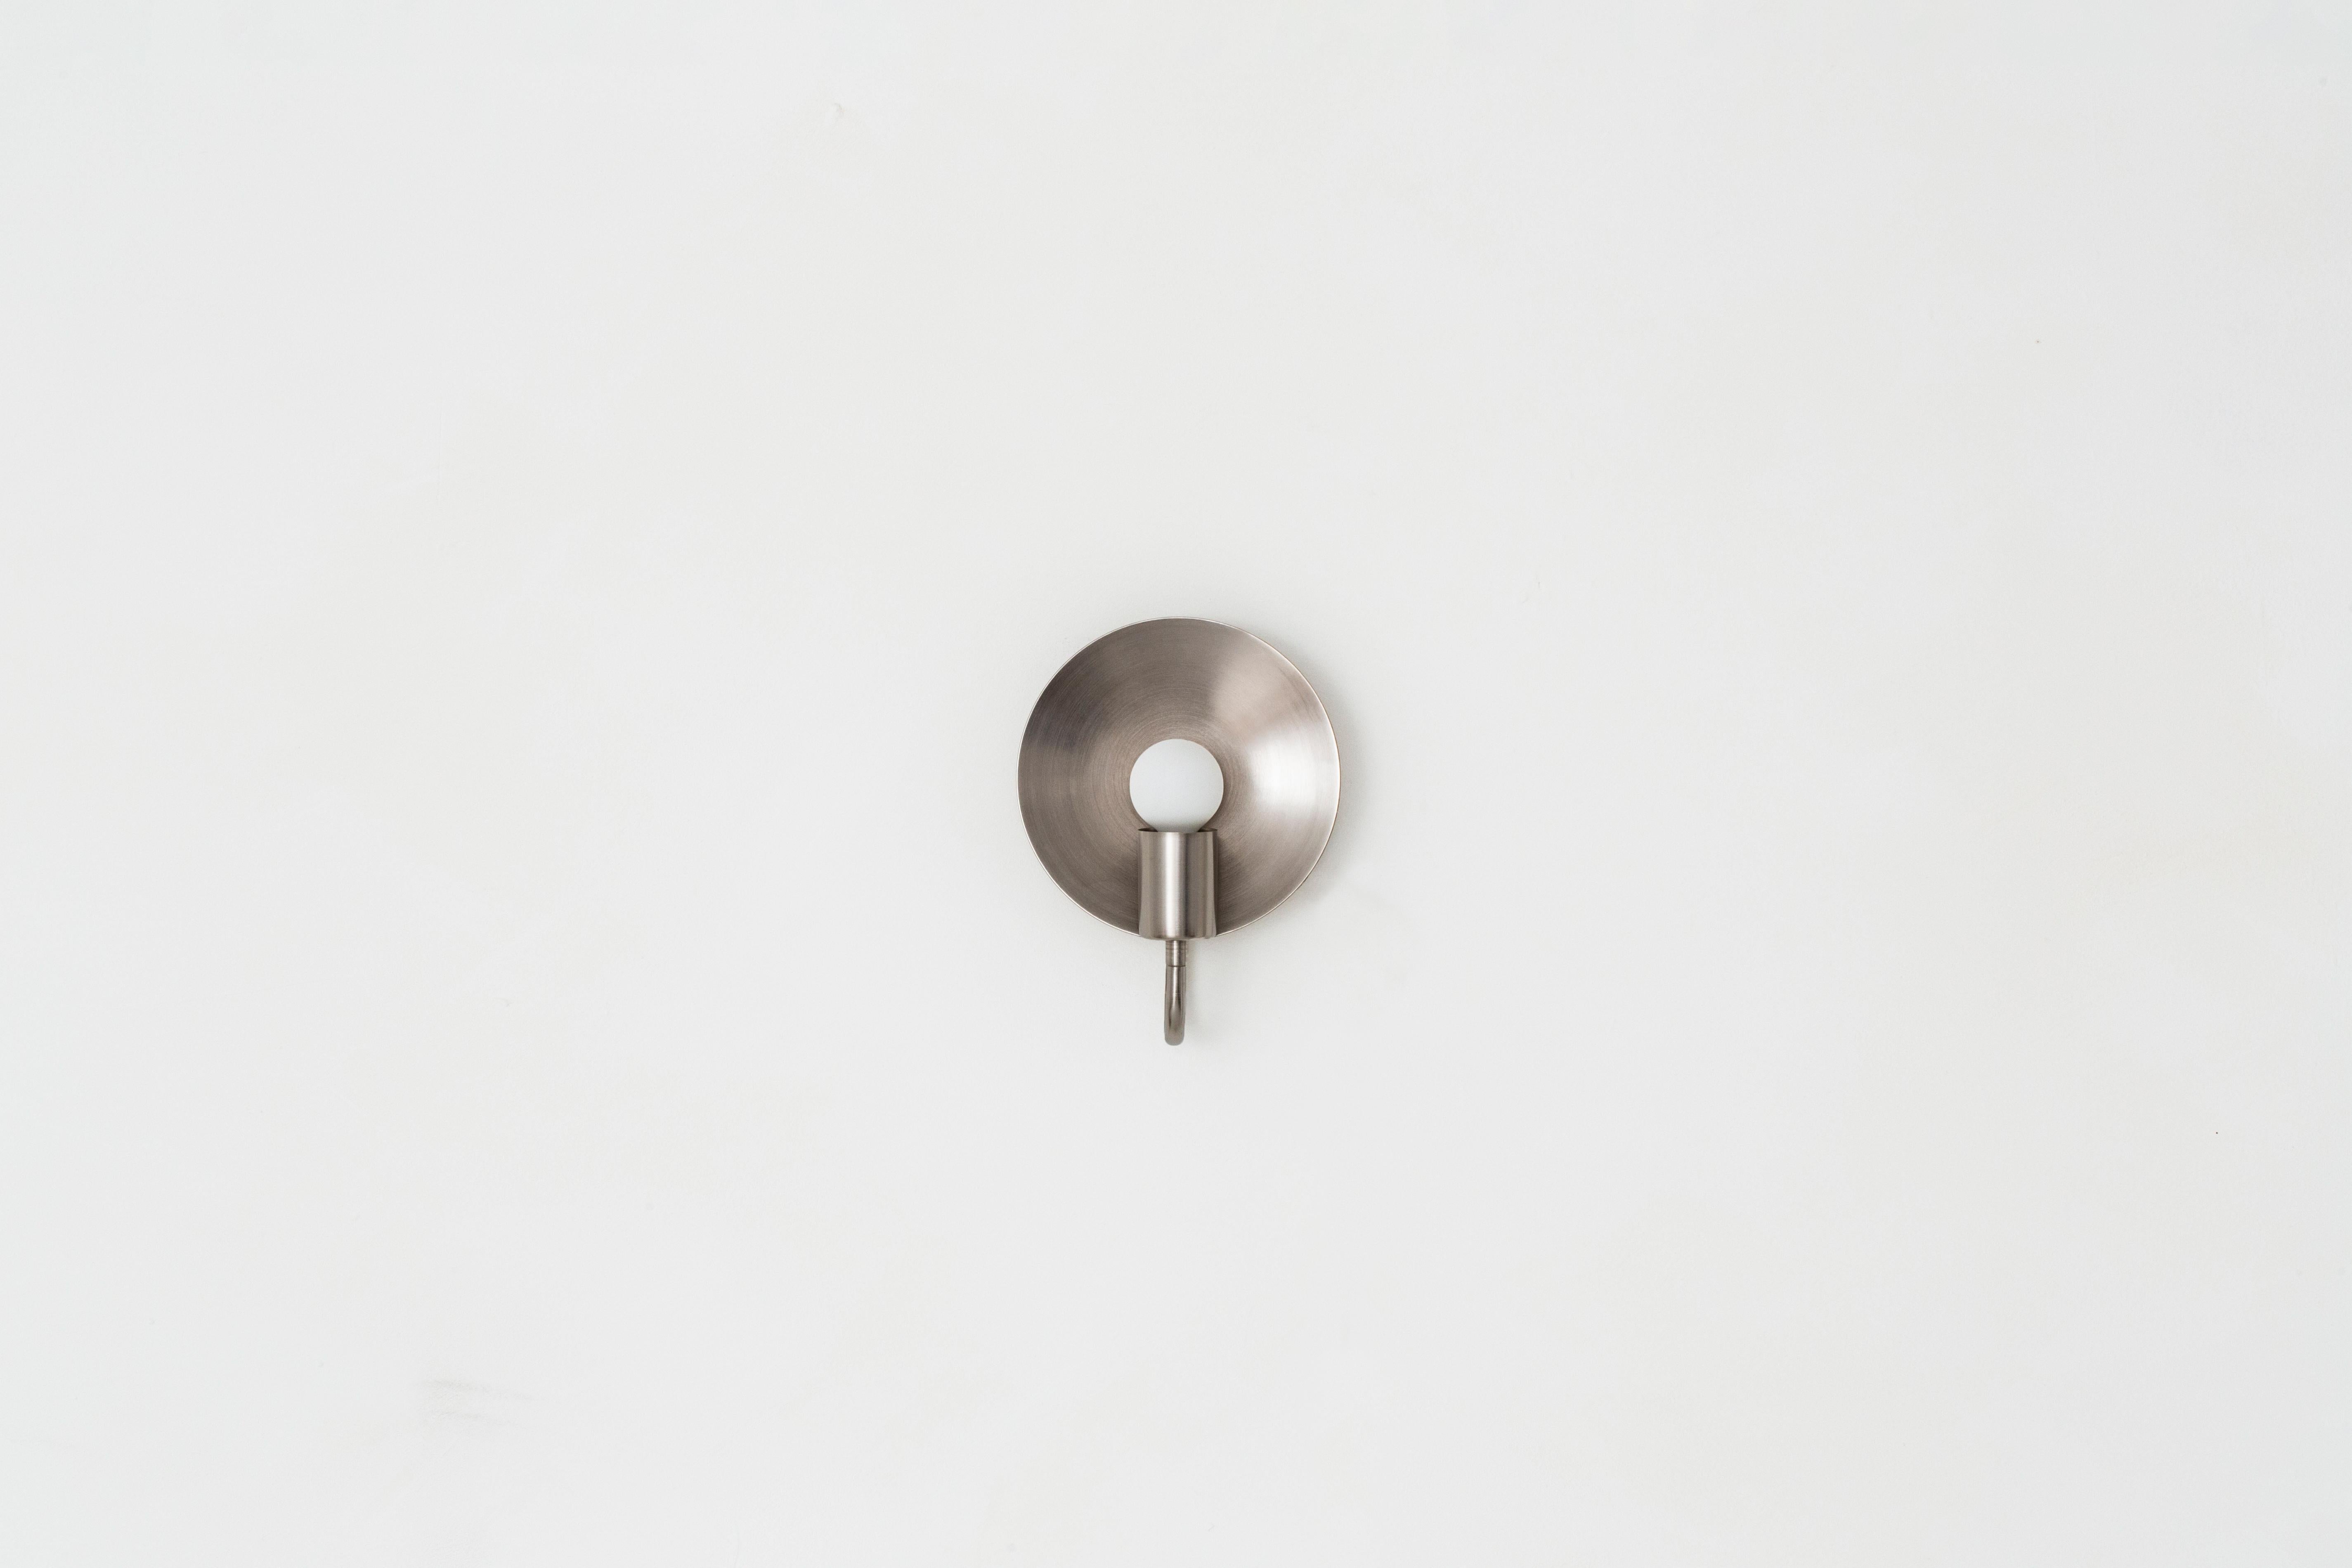 A fixed version of our Classic orbit sconce, this ADA compliant fixture is perfectly proportioned for any space where a minimal profile is desired. A modern take on an early American candle form, the piece features a radiant disc that amplifies the